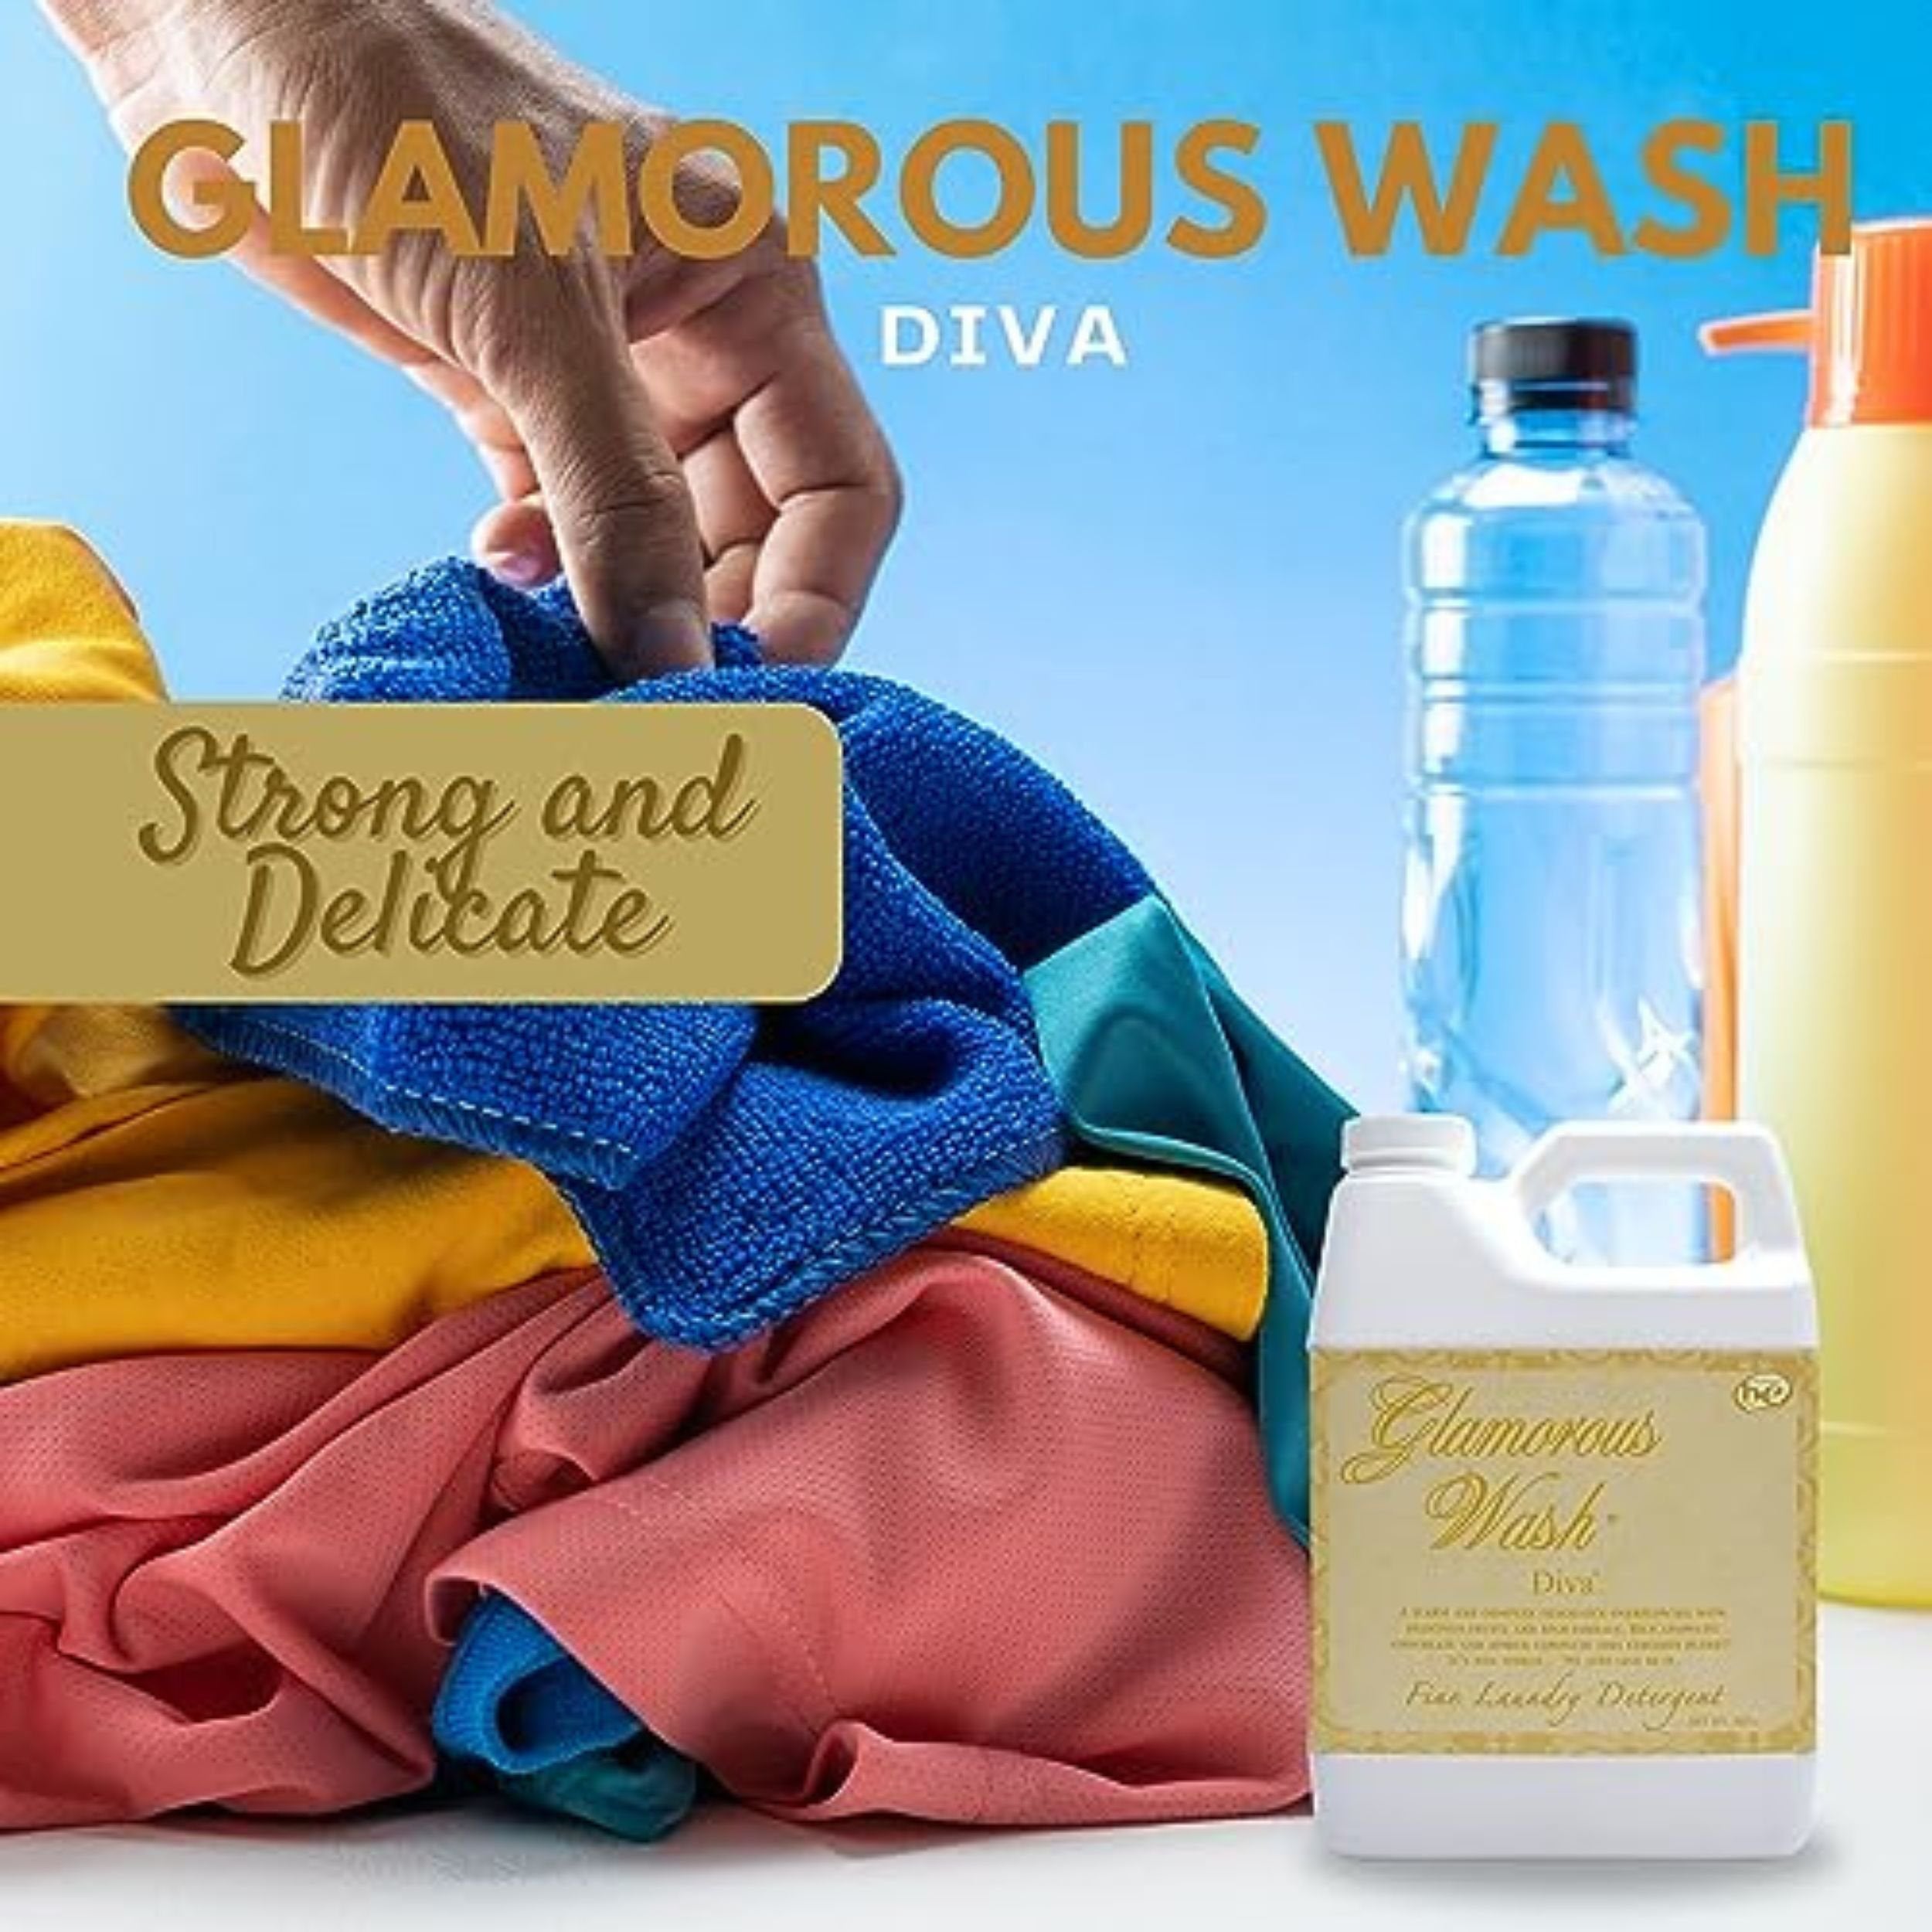 Tyler Candle Company Glamorous Wash Diva Fine Laundry Liquid Detergent - Hand and Machine Washable - 907g  (32 fl oz) - Pack of 1 with Multi-Purpose Keychain